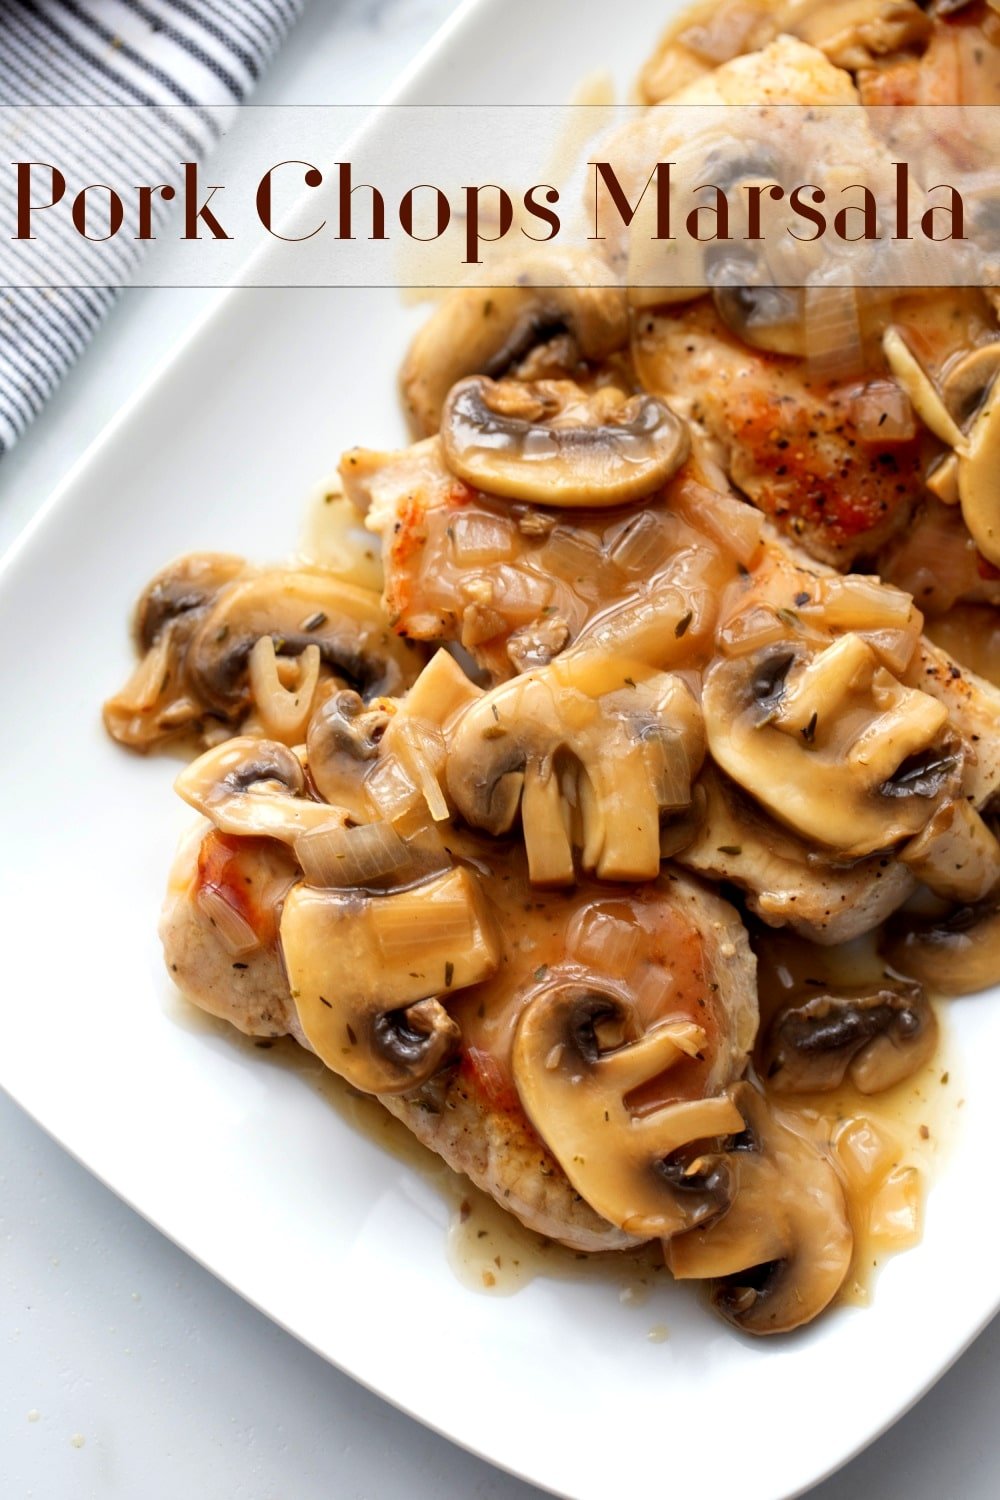 For an effortless spin on chicken marsala, switch things up with boneless pork chops and make this delicious Pork Marsala. Seared to perfection and simmered in a glossy sauce teeming with golden-brown mushrooms and sweet marsala wine. Dinner in fifteen minutes with a hint of elegance, this pork chop dinner is one you'll make again and again. via @cmpollak1